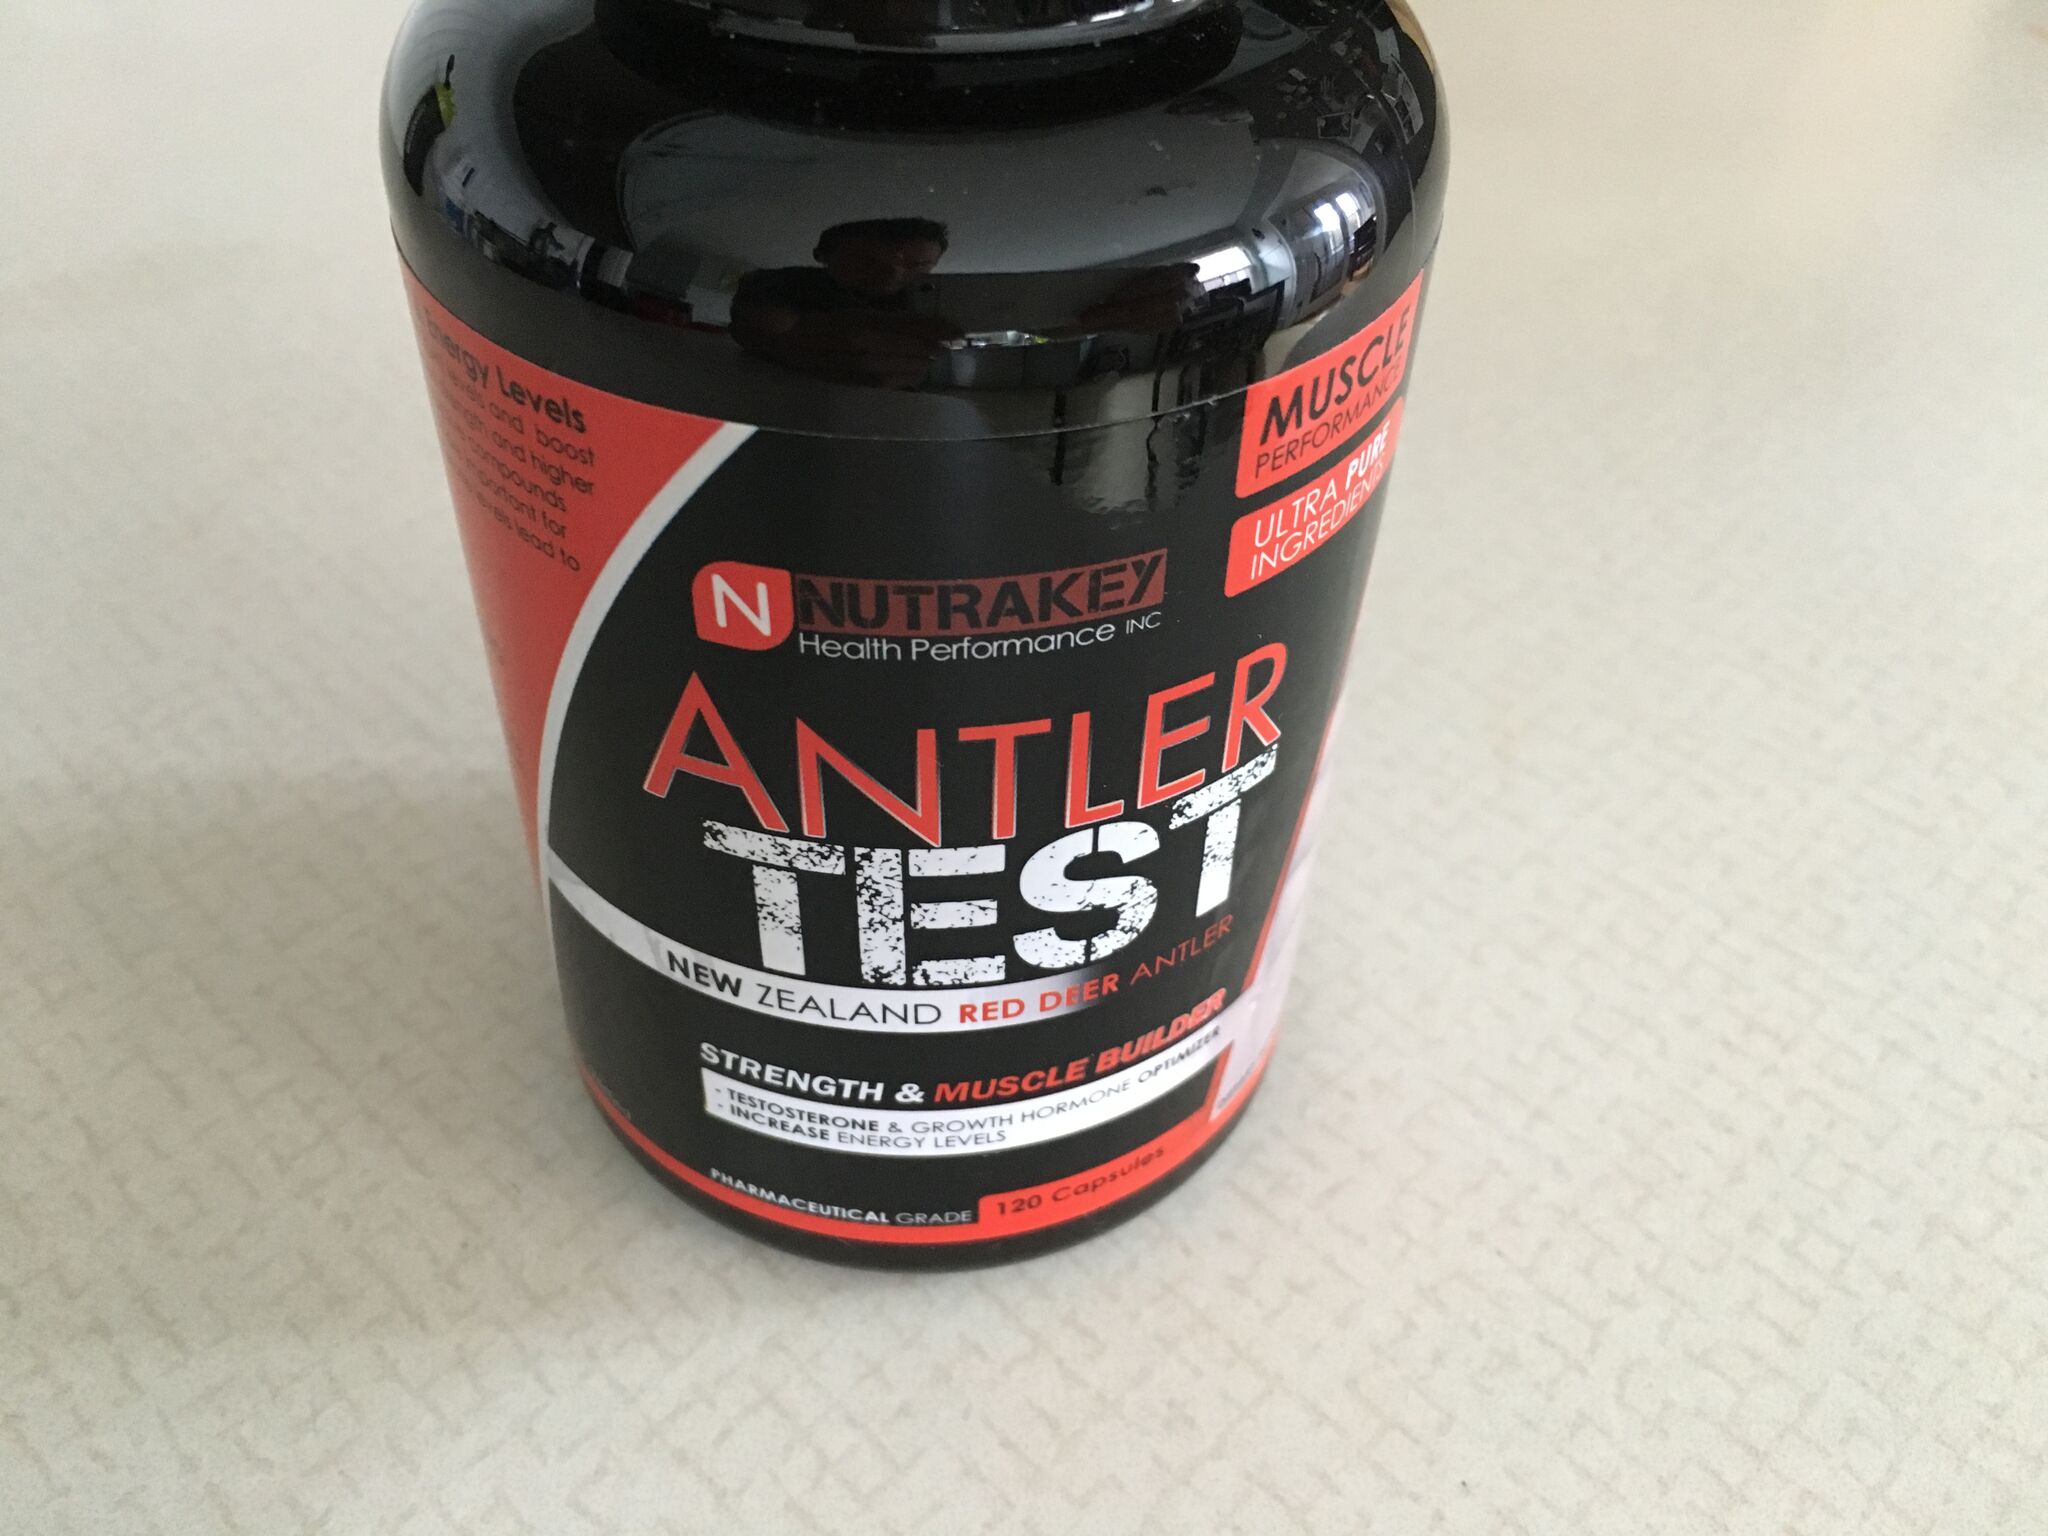 Antler Test Review – Need a boost?